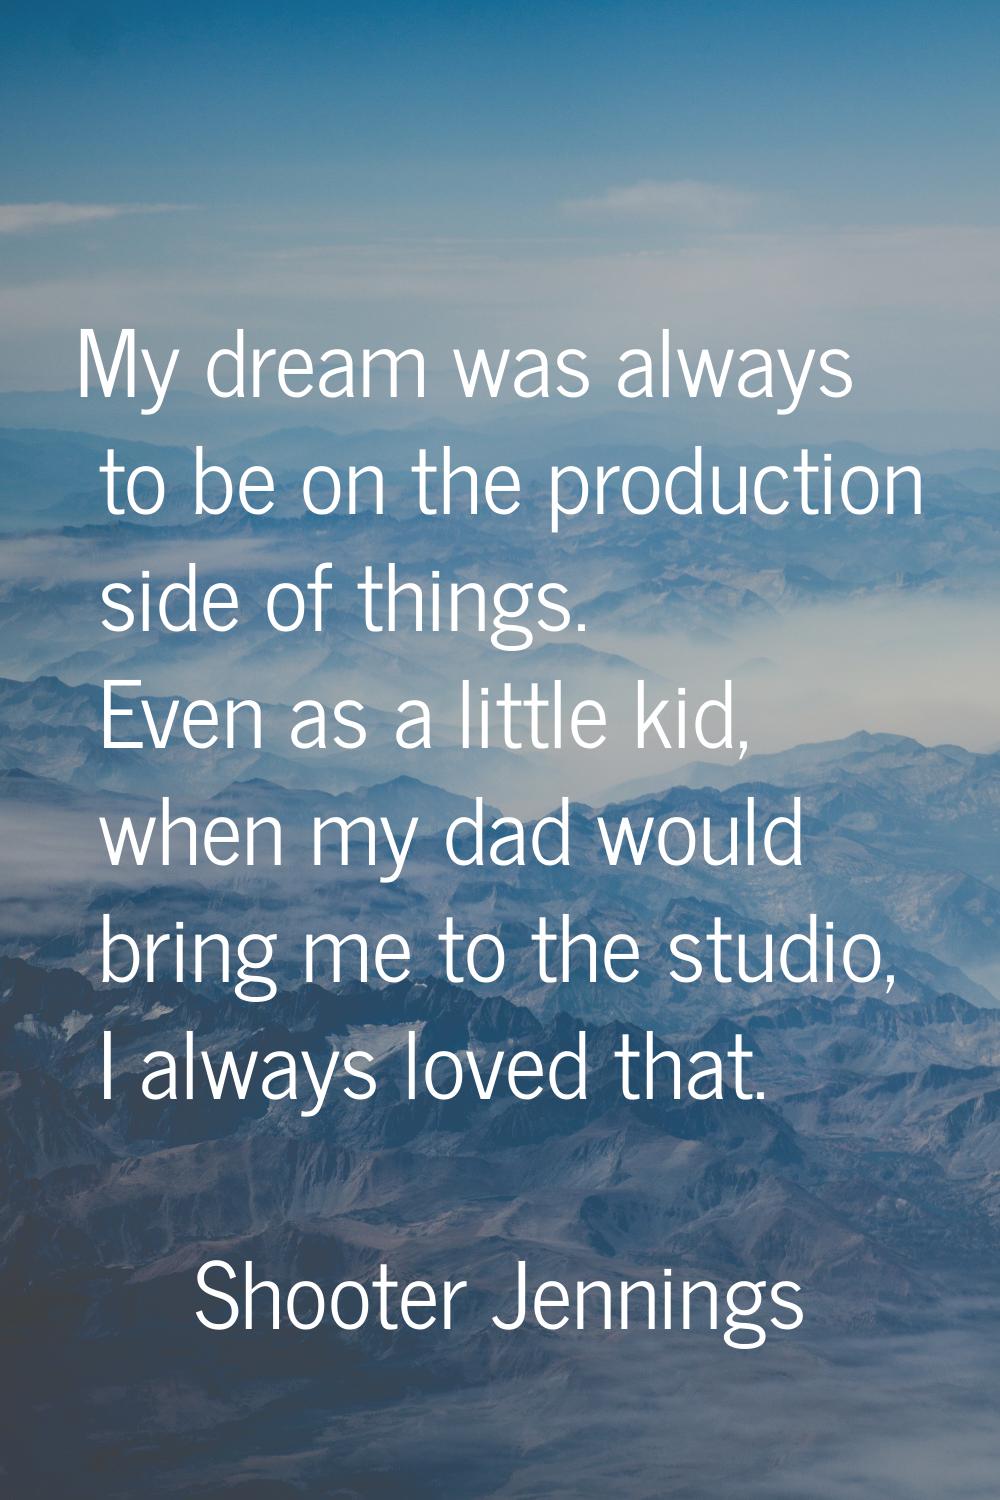 My dream was always to be on the production side of things. Even as a little kid, when my dad would